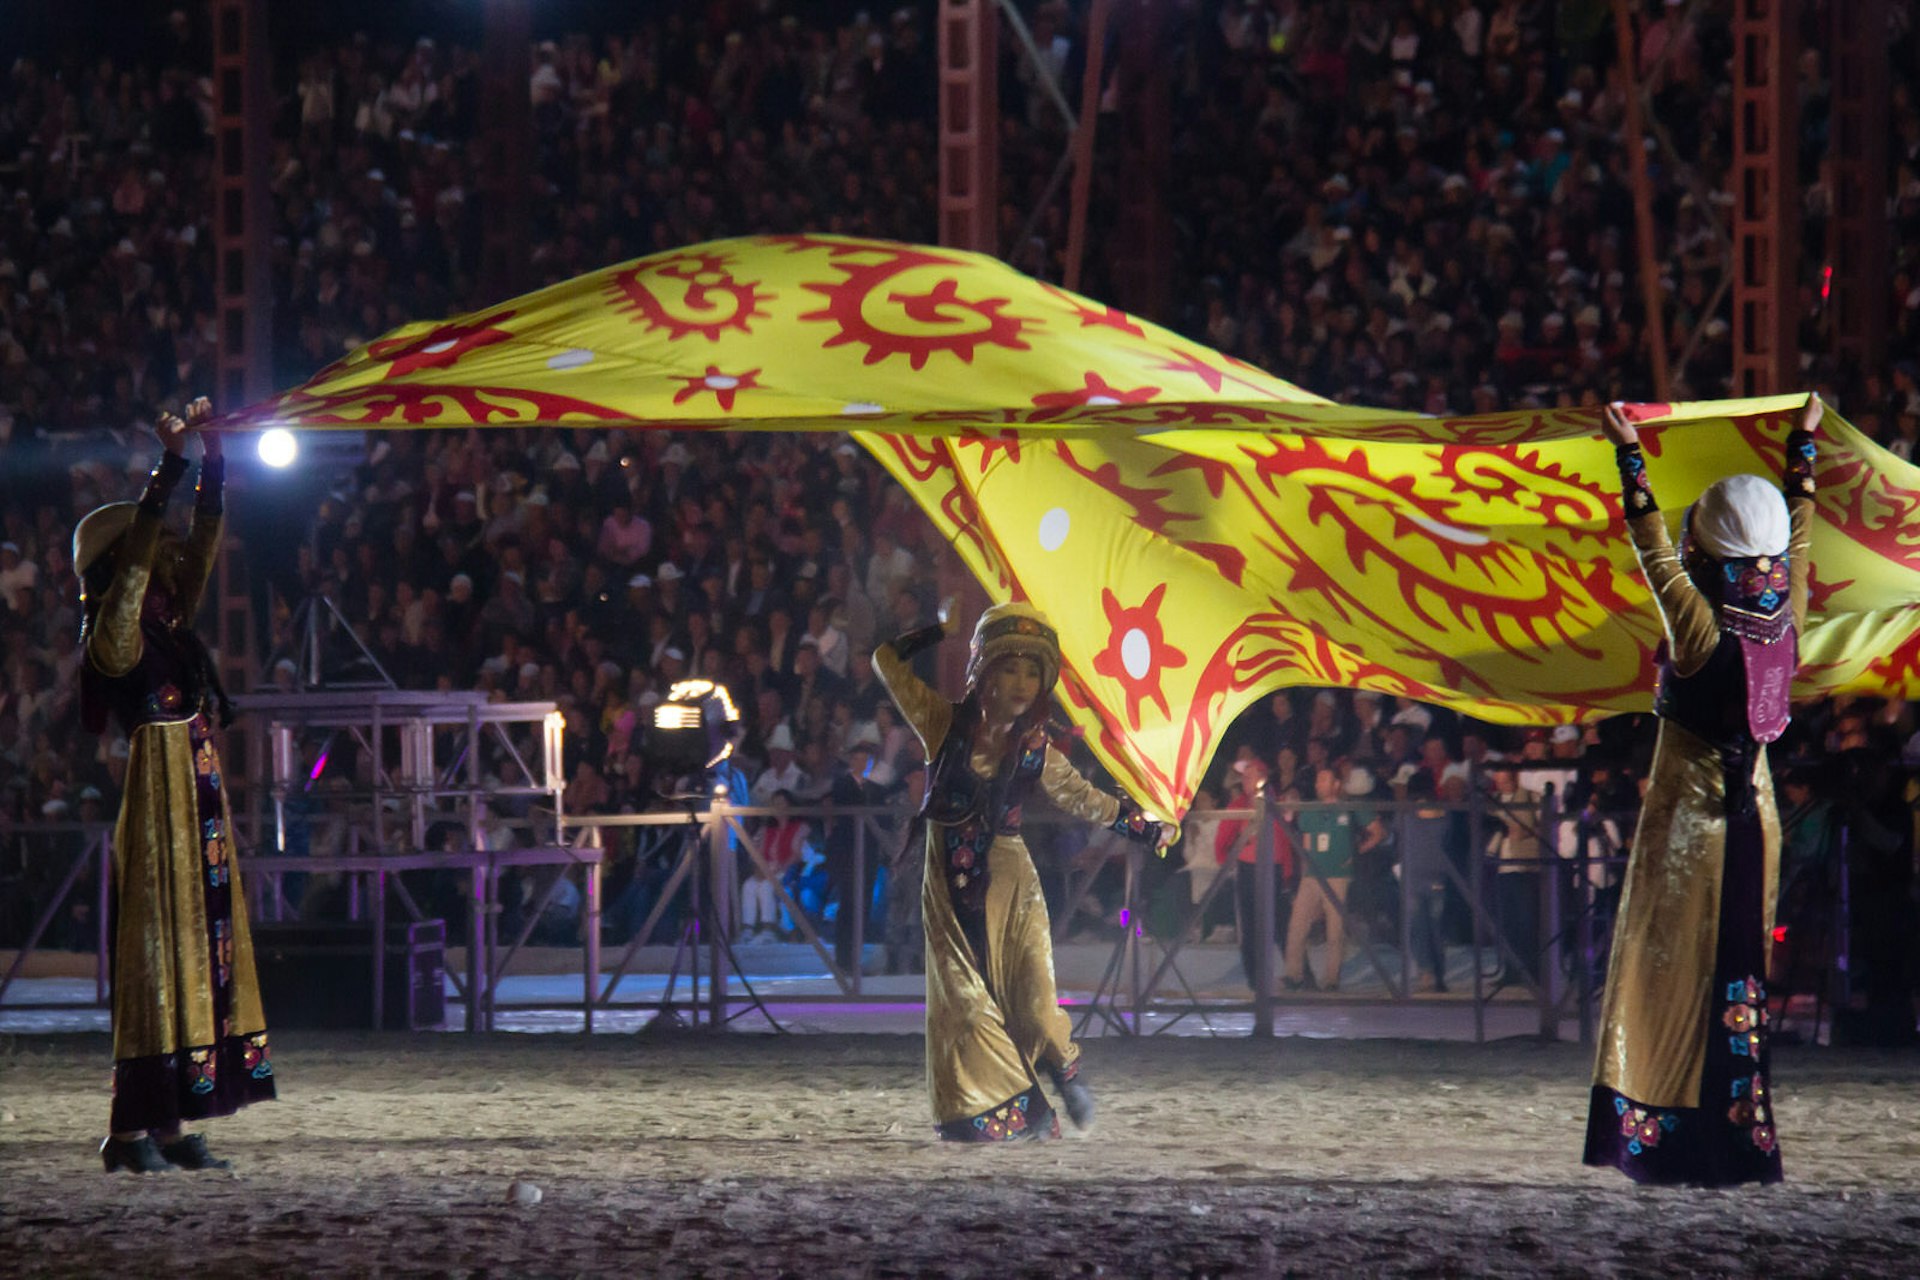 Kyrgyz dancers twirl with a giant yellow flag inside a packed stadium for the 2014 World Nomad Games opening ceremony © Stephen Lioy / Lonely Planet